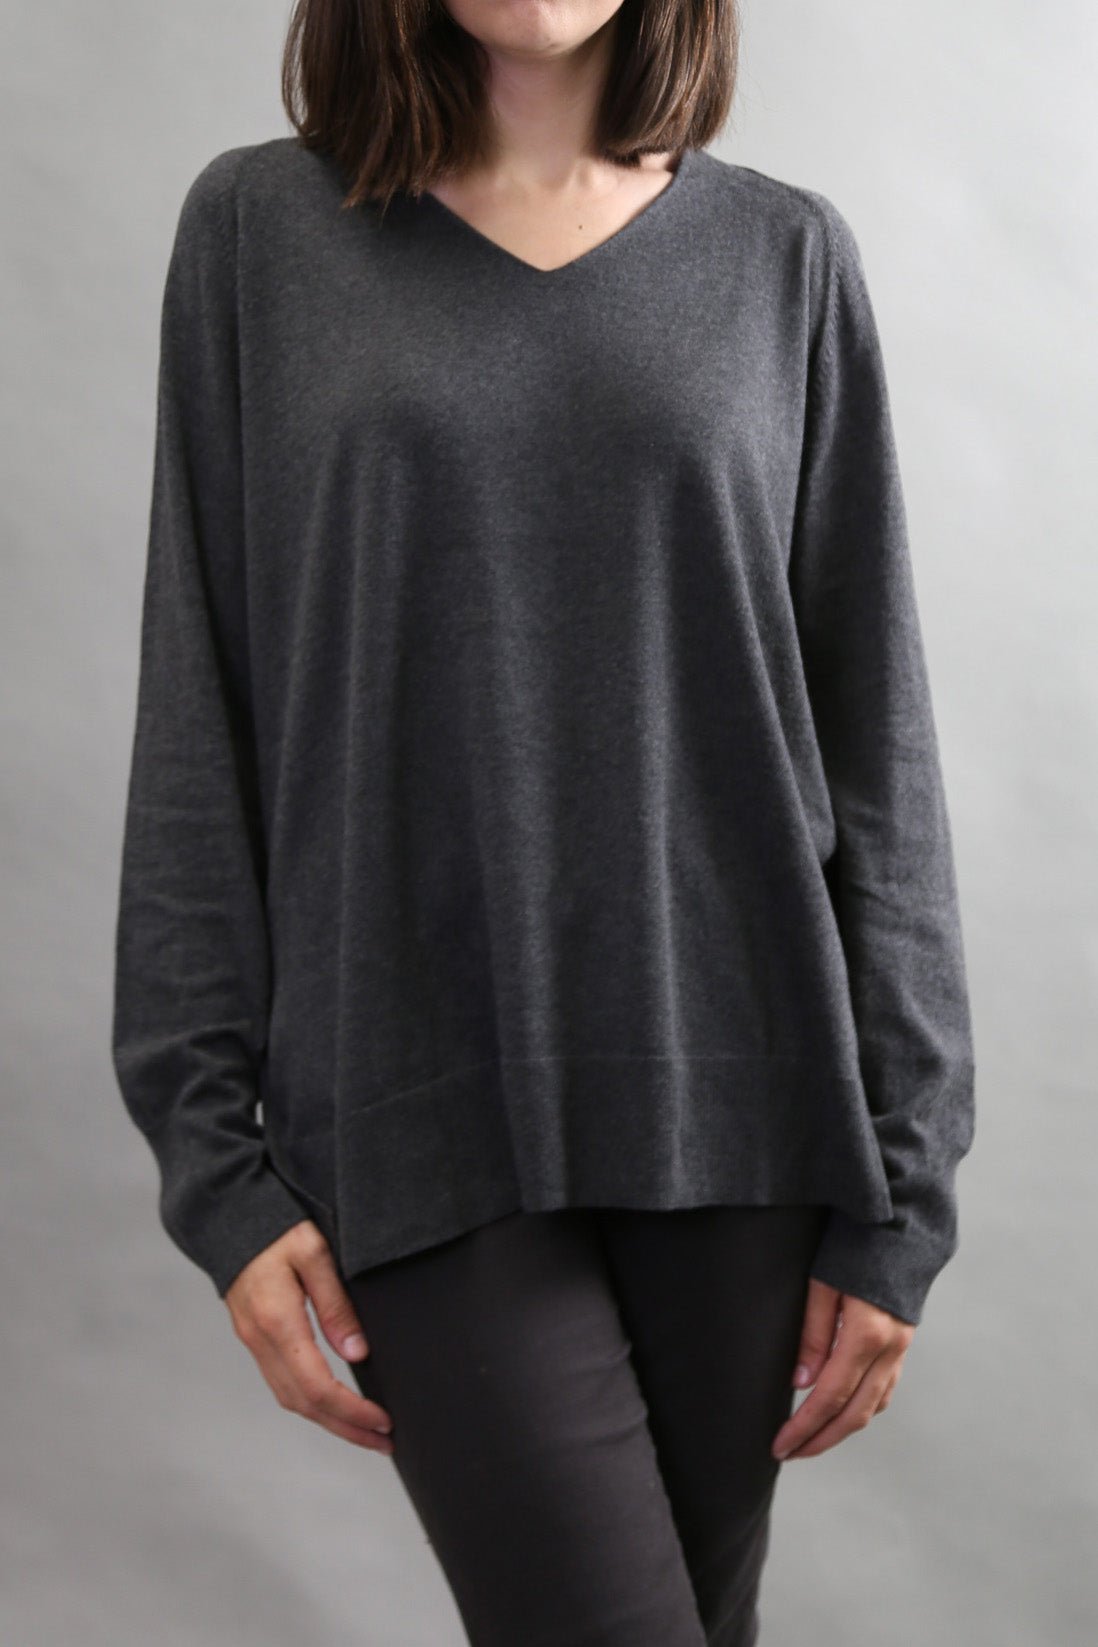 AVERY V NECK TUNIC IN DOUBLE KNIT PIMA COTTON IN CHARCOAL HEATHER - Jarbo